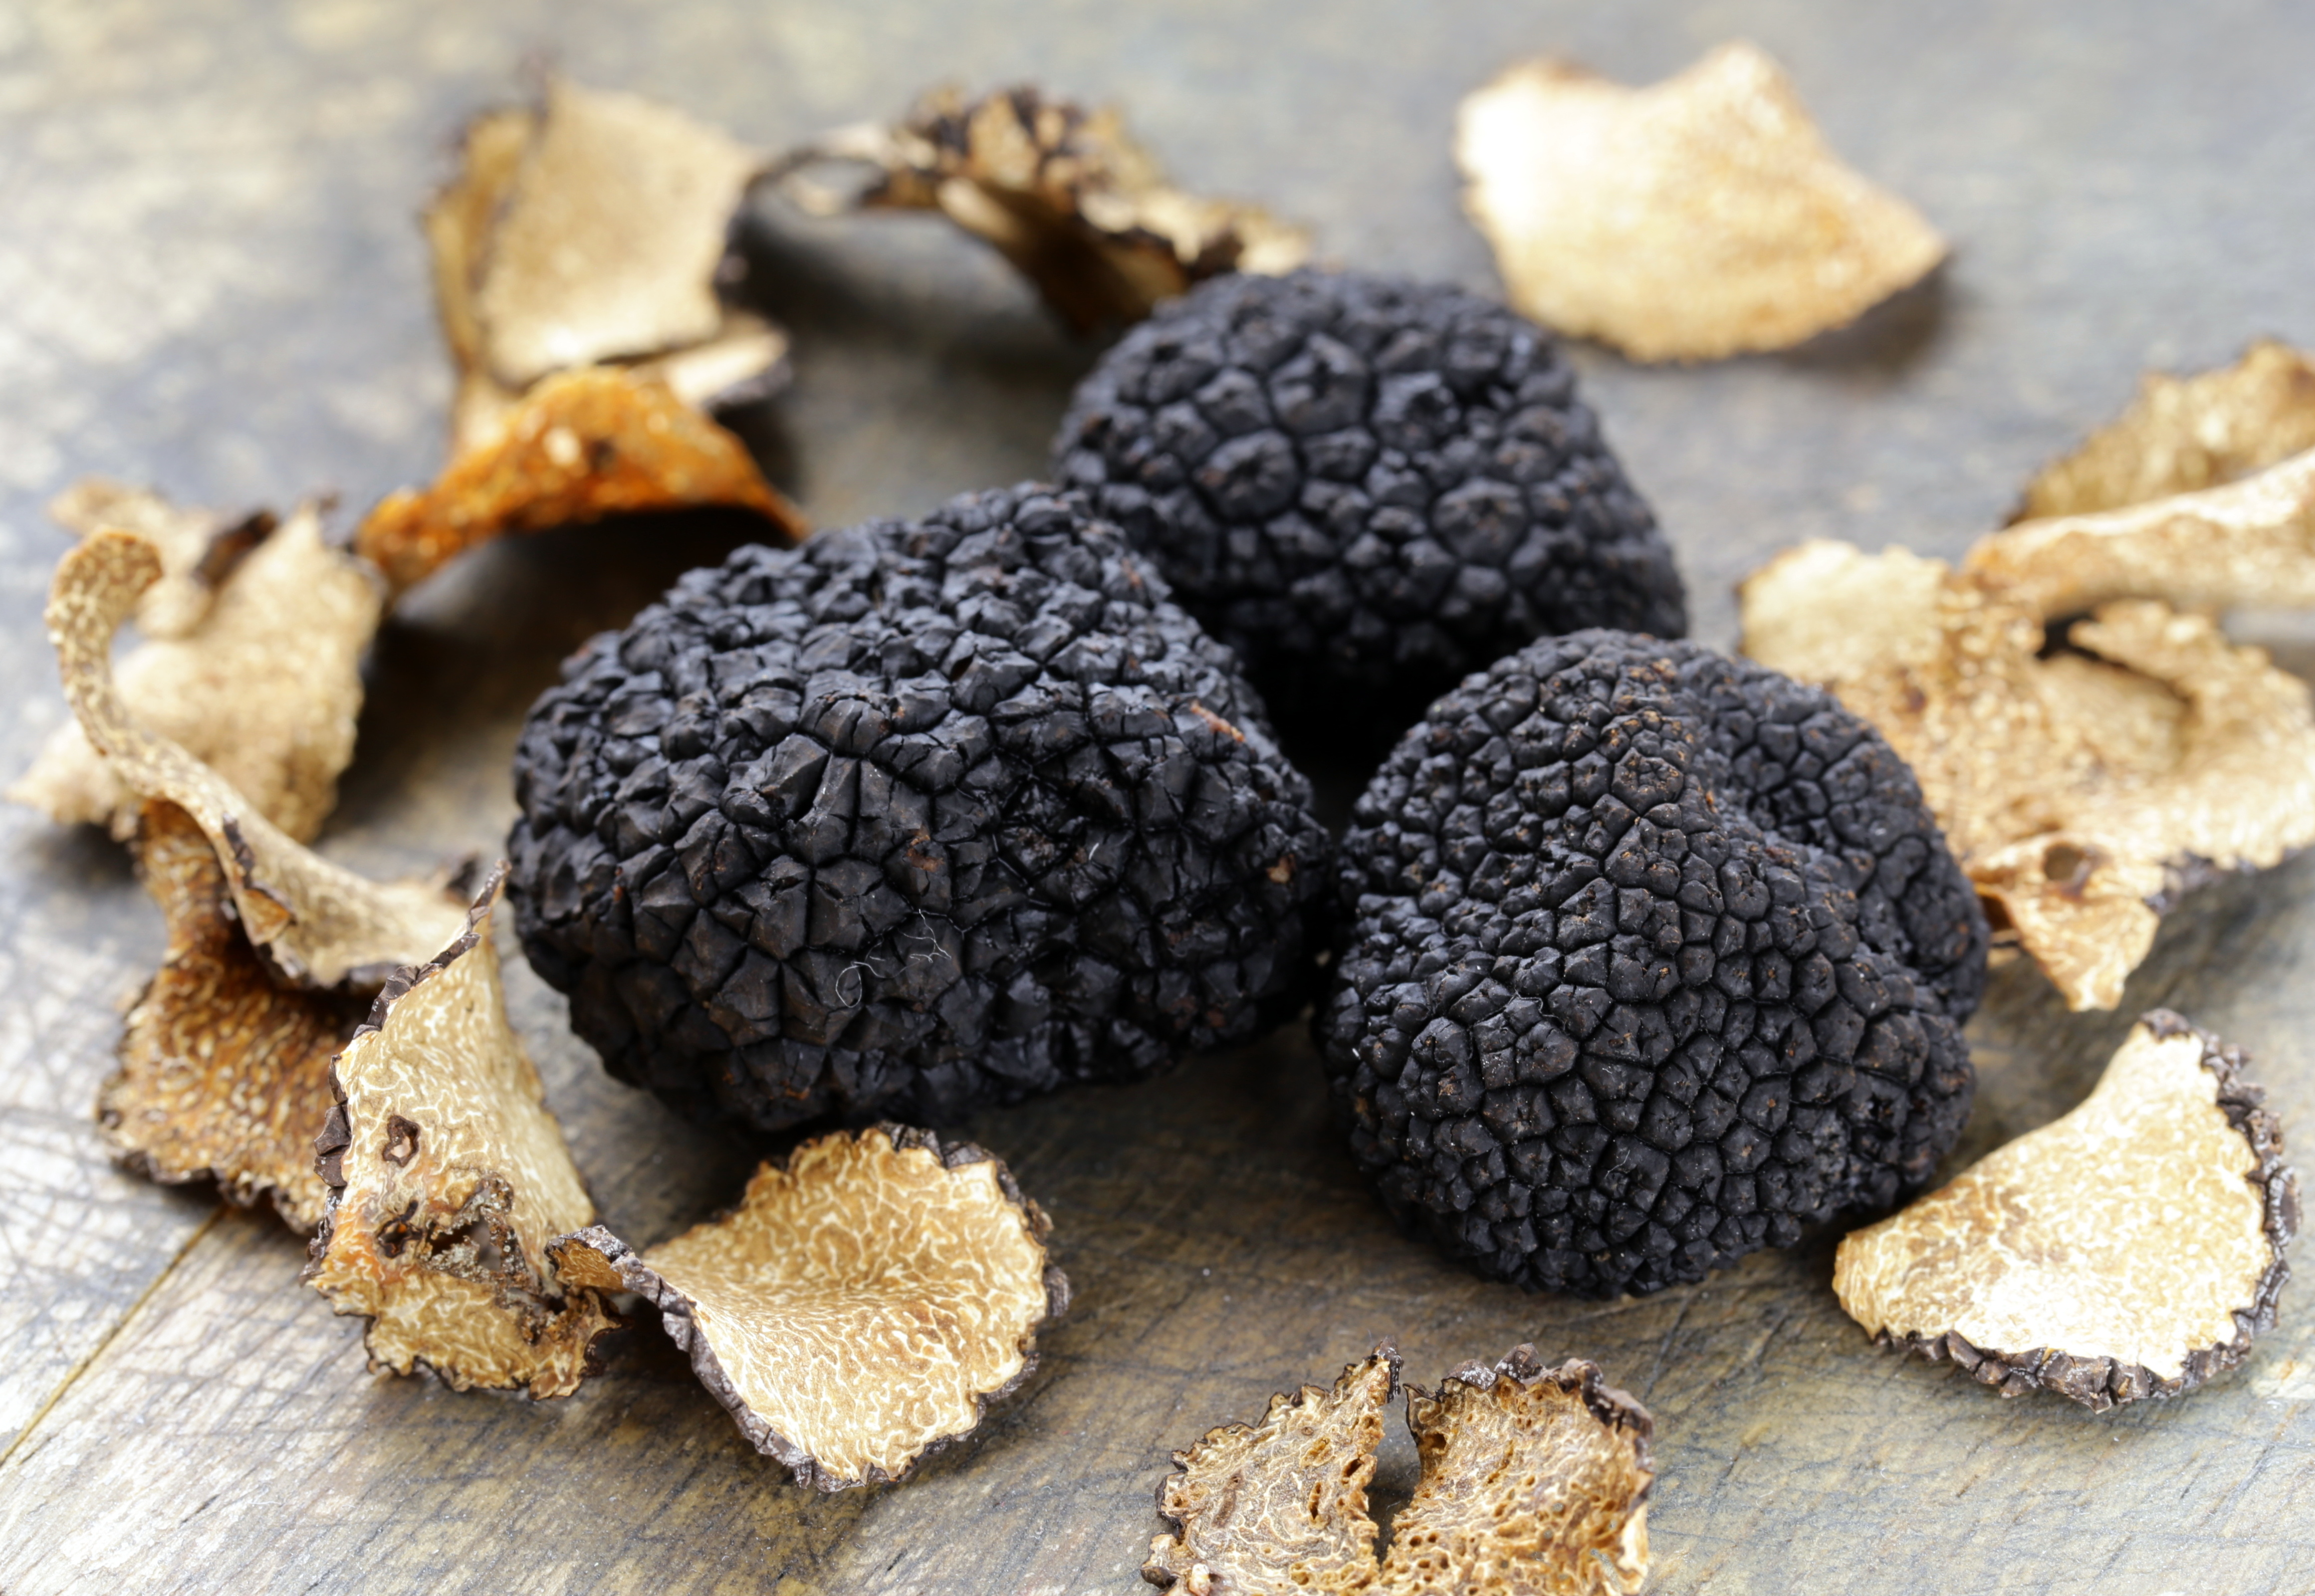 Truffle: The black diamond of the kitchen - EHL Insights | Culinary arts